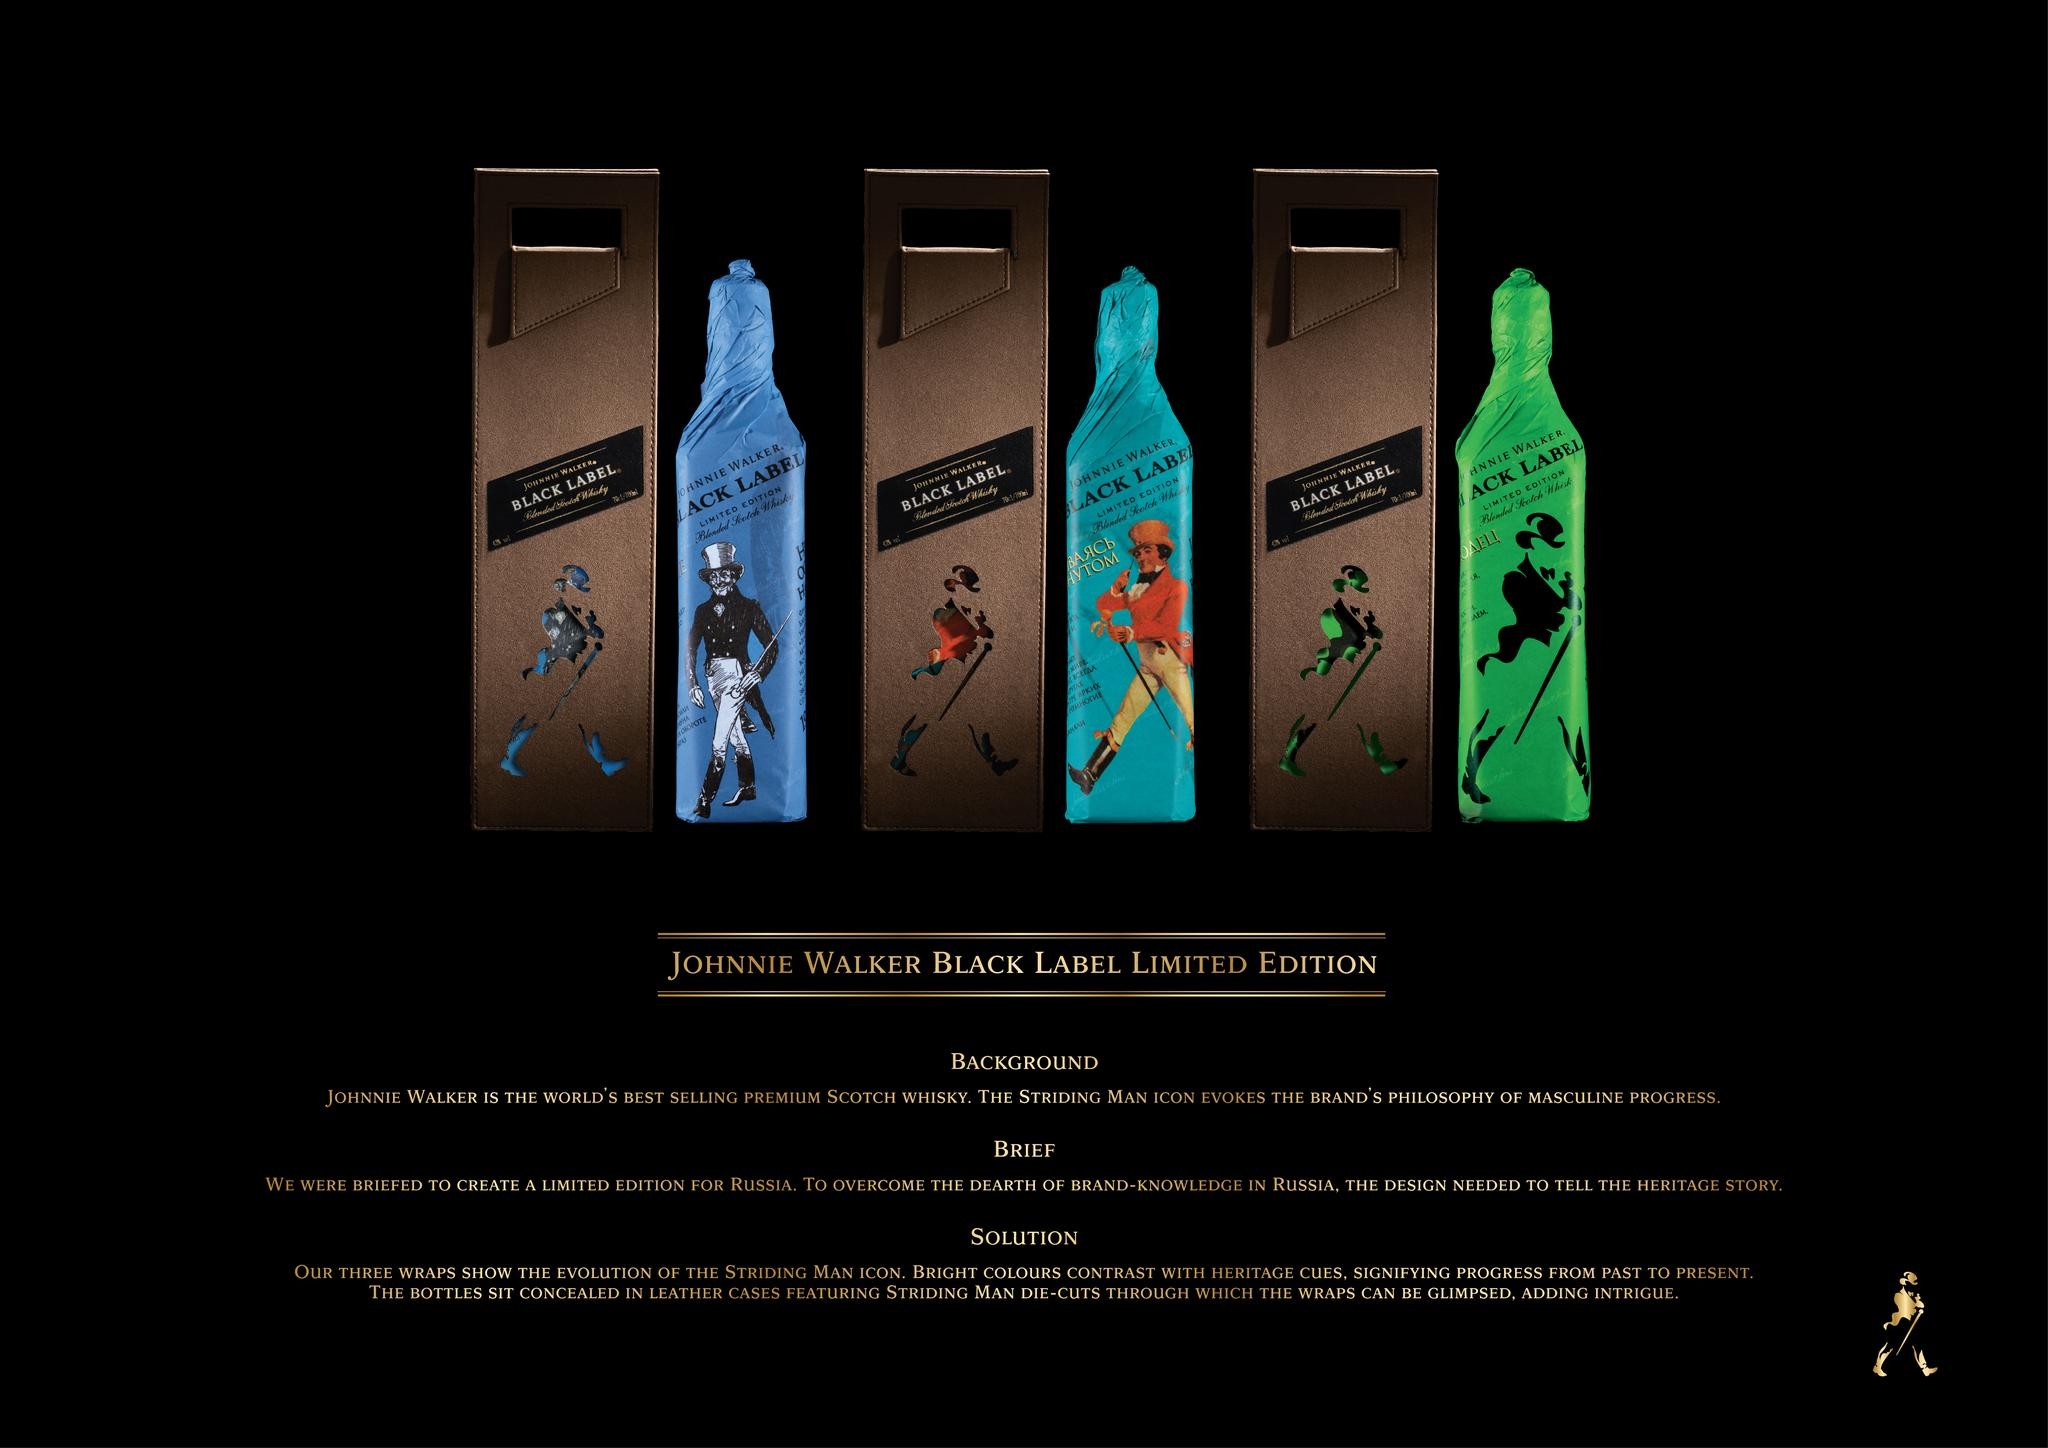 JOHNNIE WALKER BLACK LABEL LIMITED EDITION FOR RUSSIA